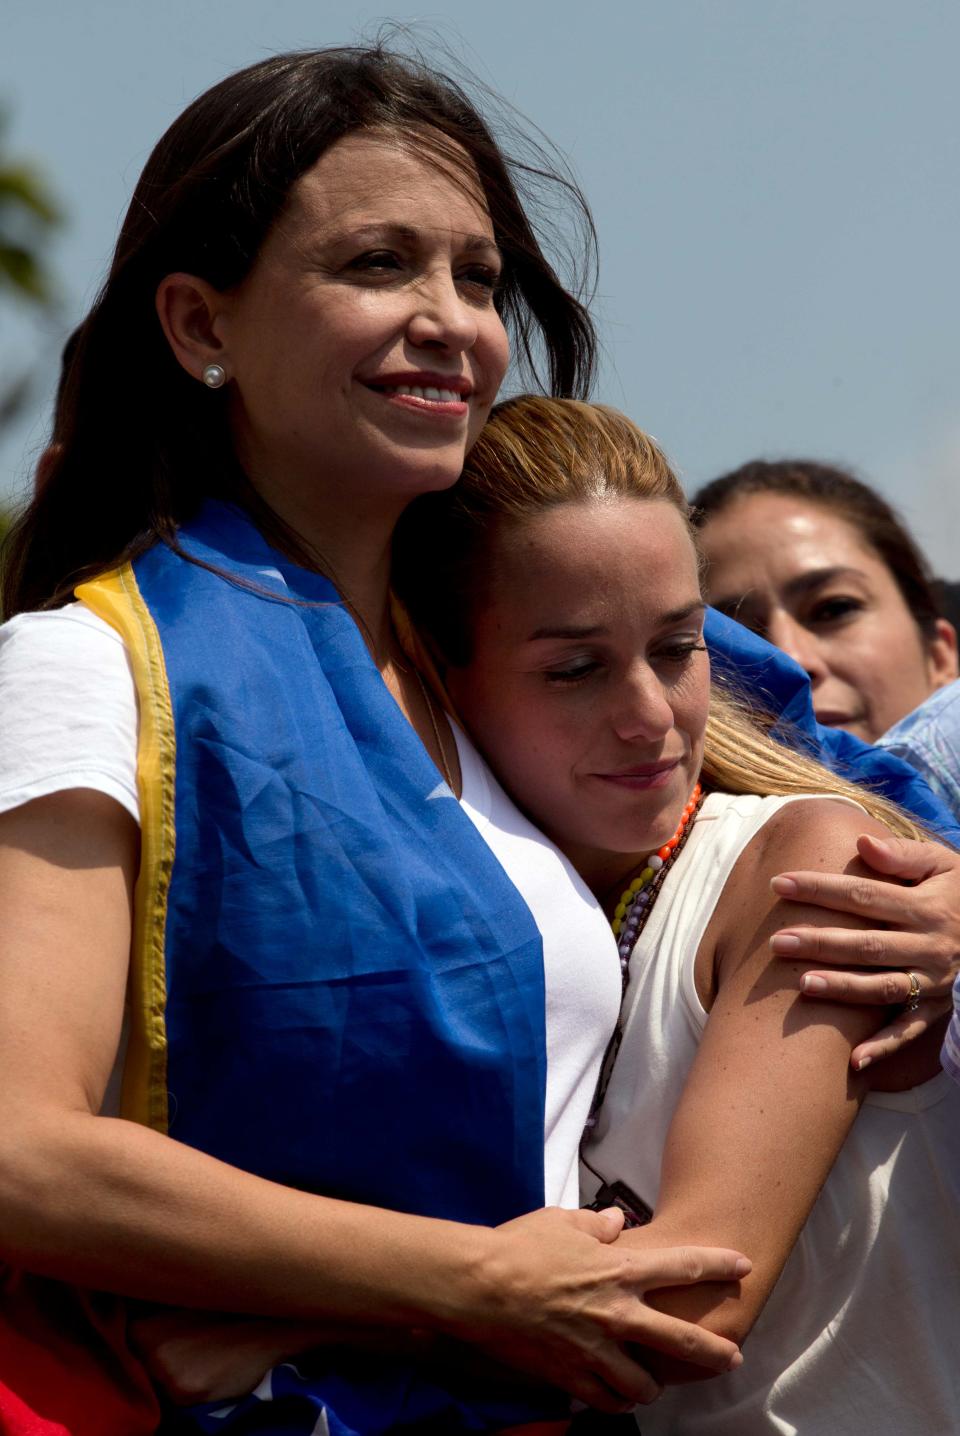 Leading opposition politician Maria Corina Machado, left, embraces Lilian Tintori, wife of jailed opposition leader Leopoldo Lopez, during a rally in Caracas, Venezuela, Wednesday, March 26, 2014. The head of Venezuela's congress, Diosdado Cabello, said Monday that Machado, who was stripped of her parliament seat, violated the constitution by addressing the Organization of American States last week at the invitation of Panama, which ceded its seat at the Washington-based group group so she could provide regional diplomats with a firsthand account of the unrest. (AP Photo/Fernando Llano)